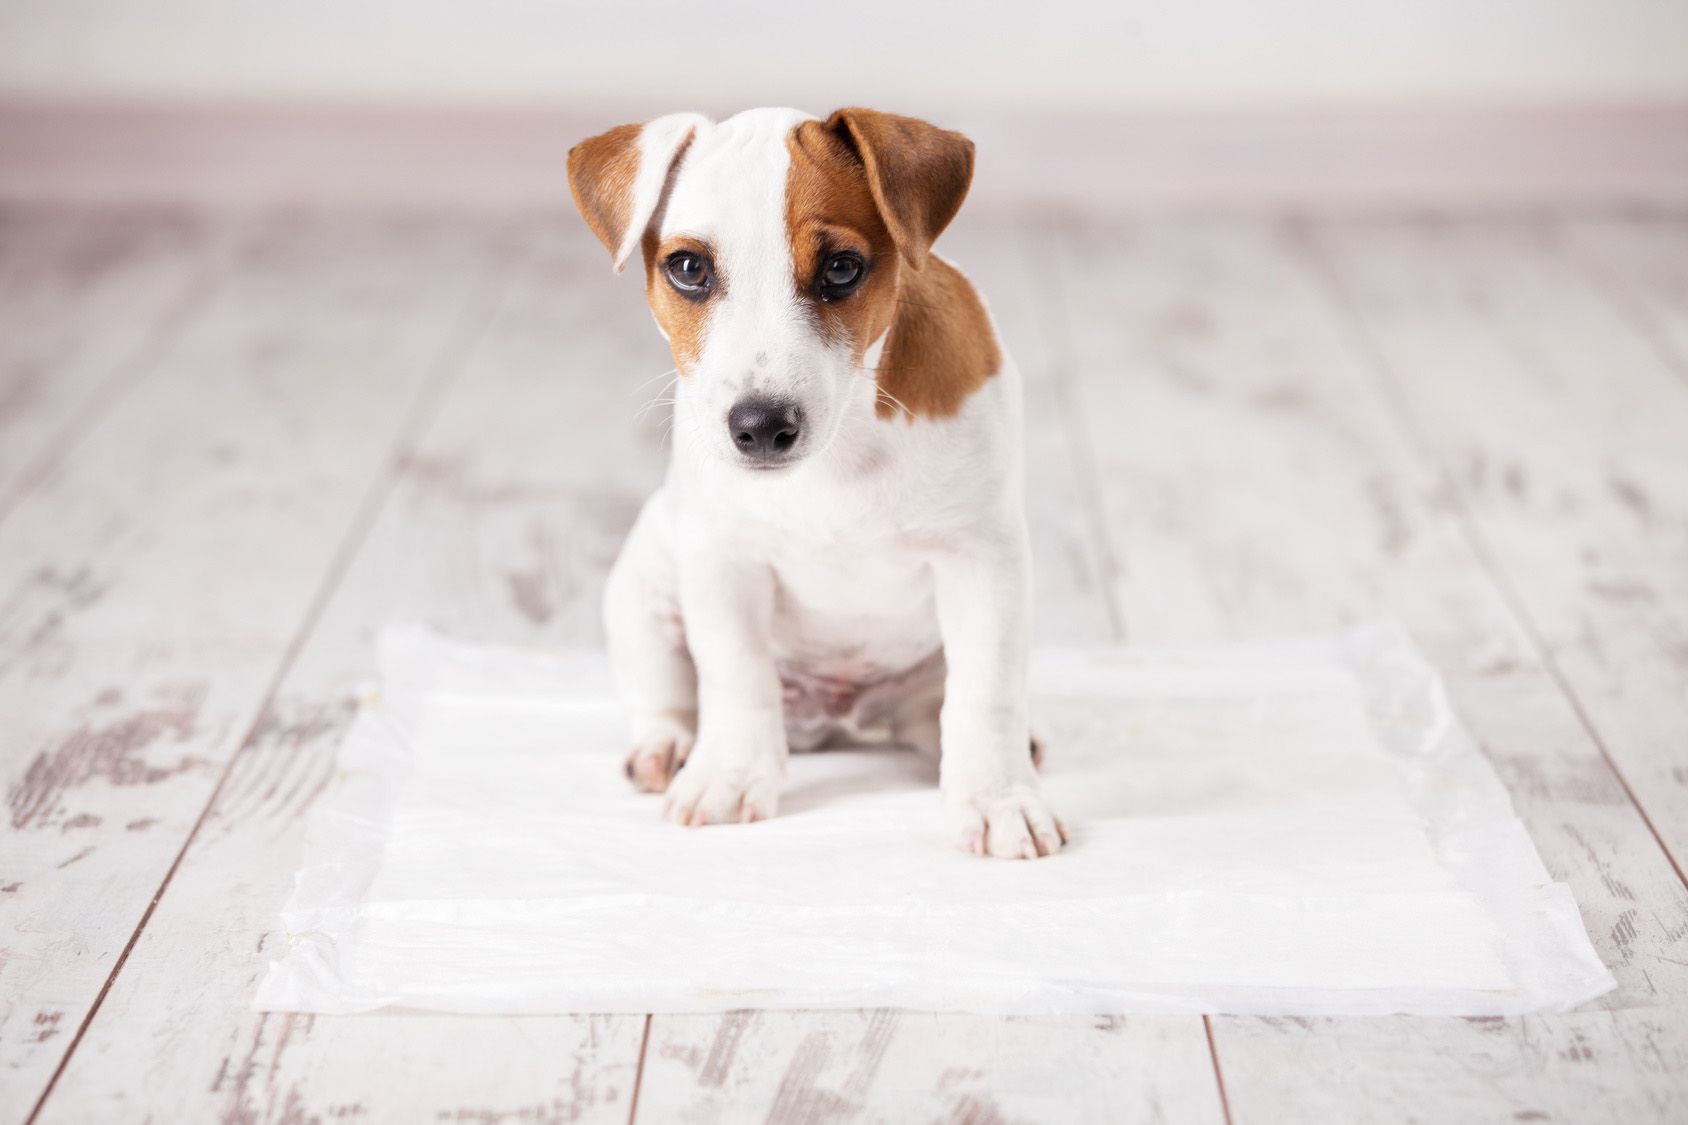 Puppy on absorbent litter. Accustom the dog to the toilet. Training pets